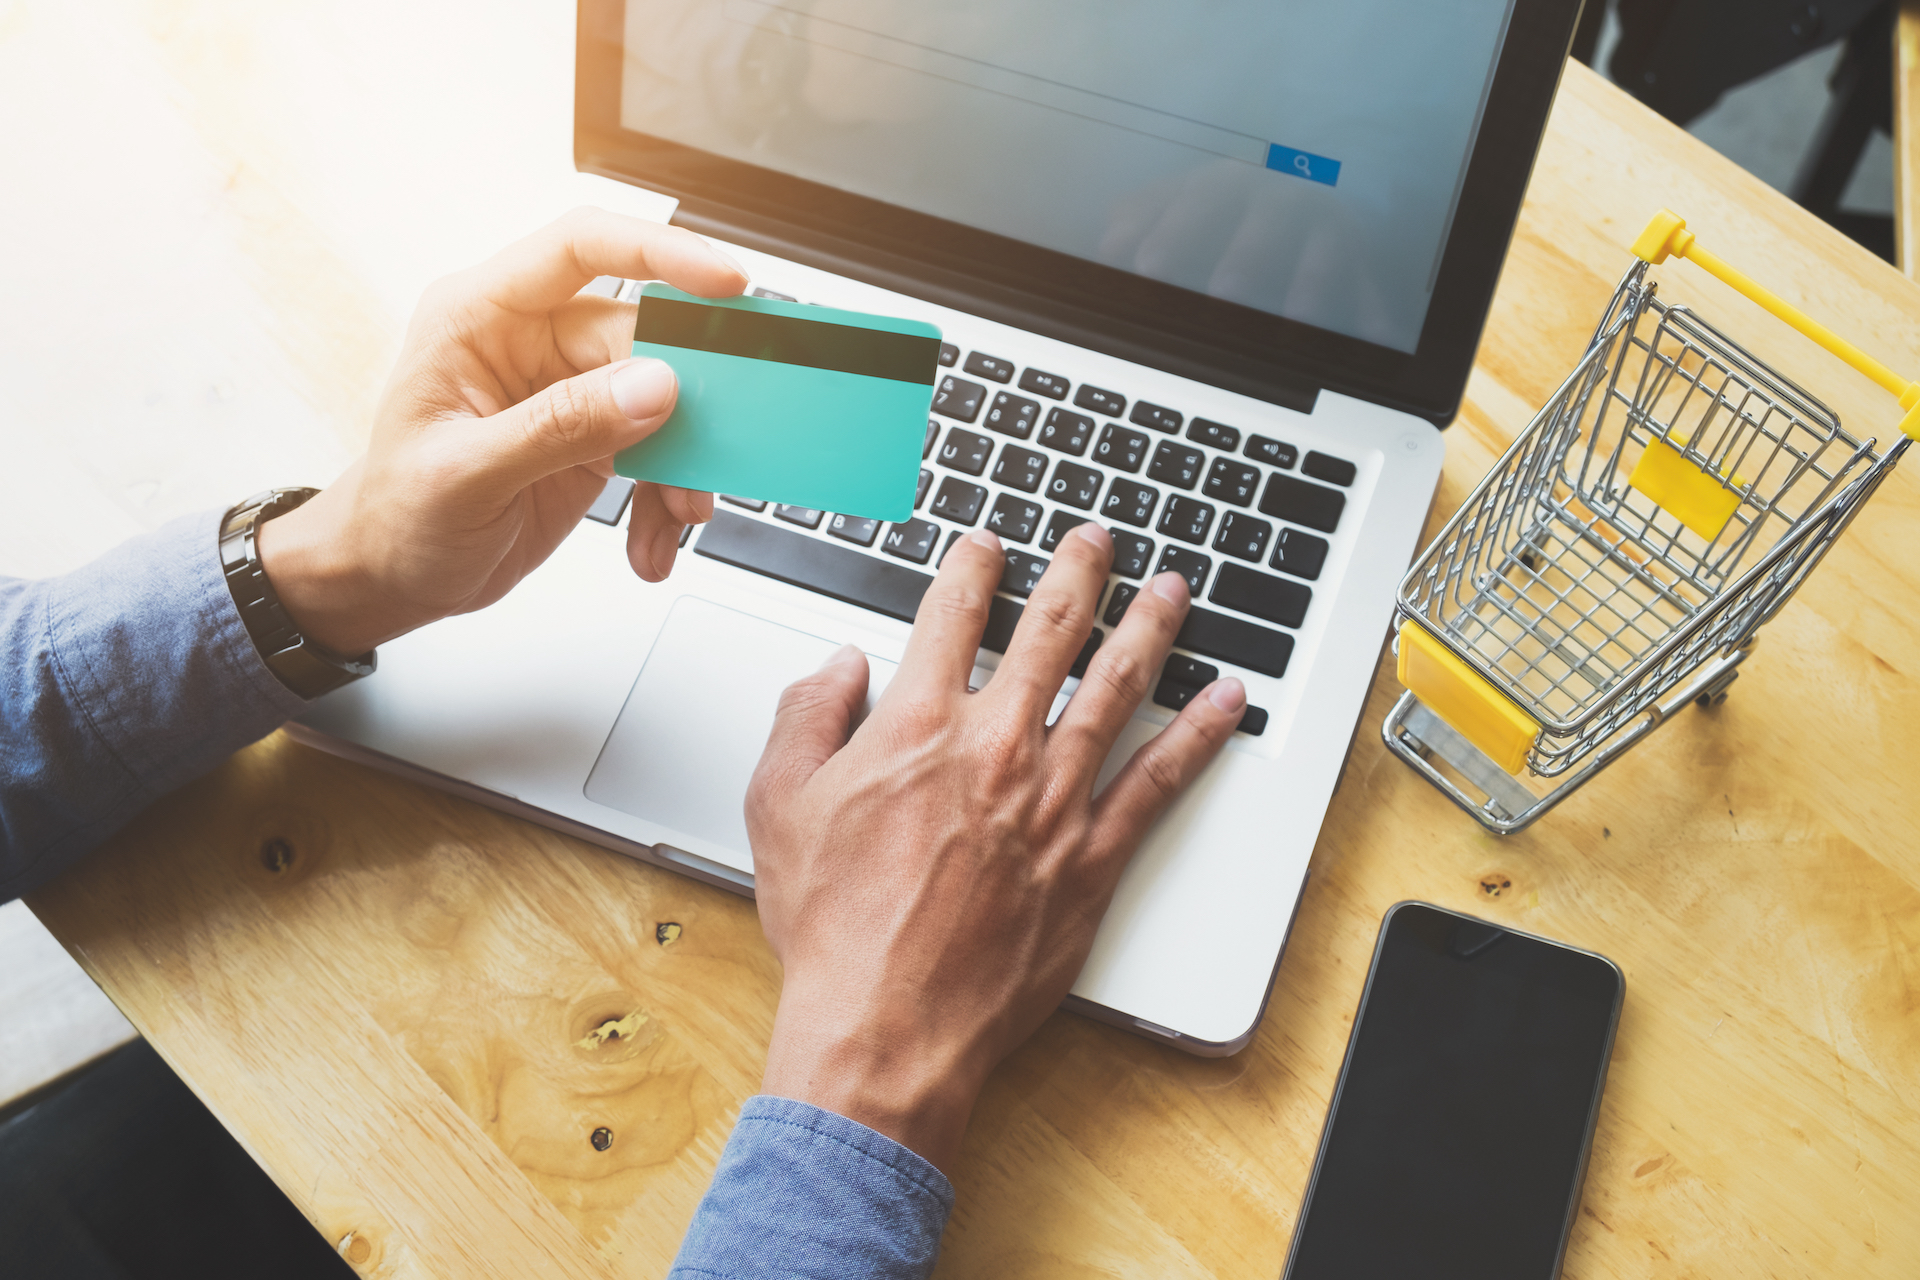 HOW TO START A SUCCESSFUL E-COMMERCE BUSINESS: A Step-by-Step Guide